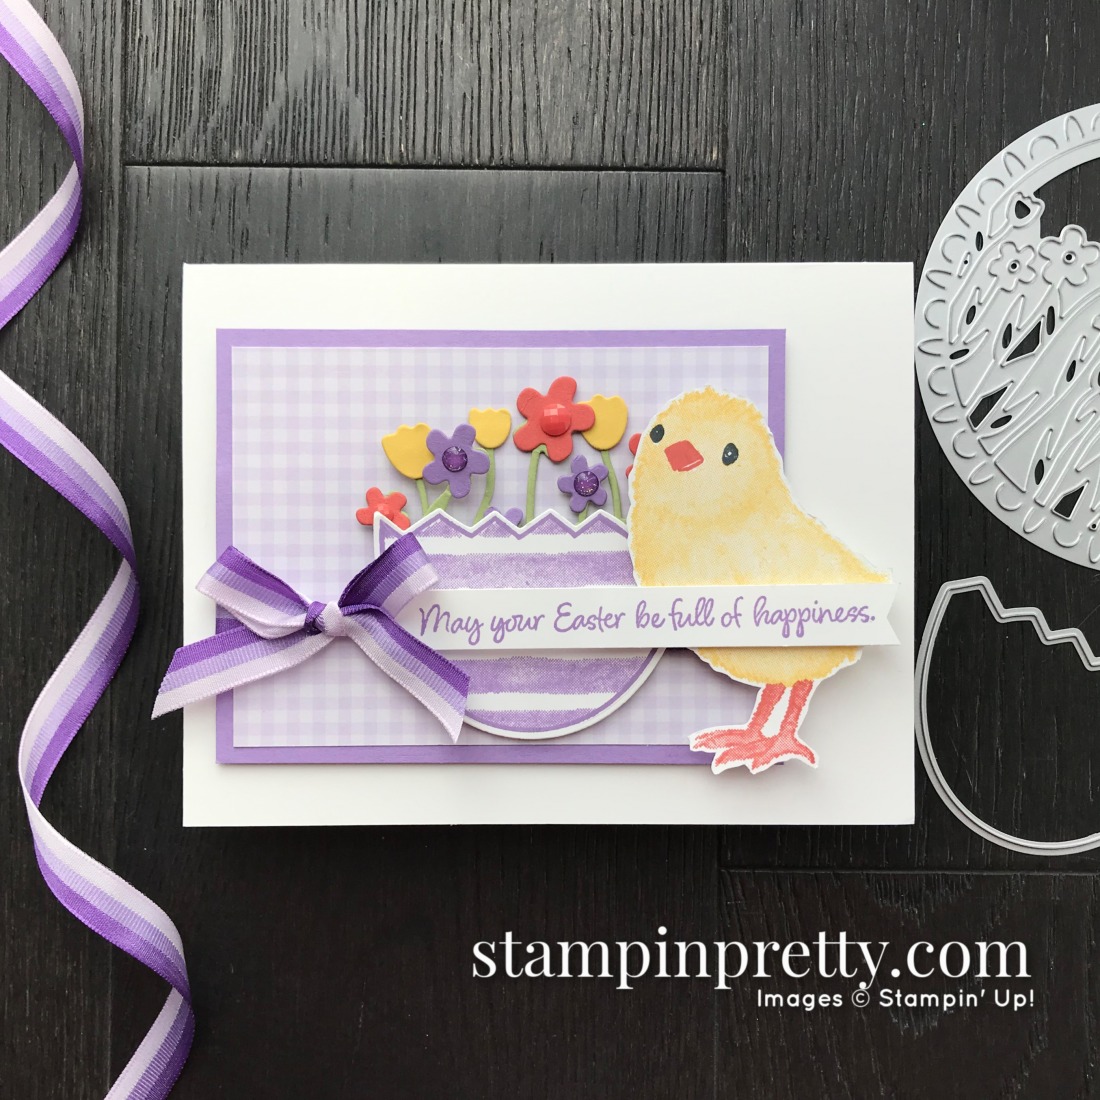 Full of Happiness Stamp Set by Stampin' Up! Cute critters card by Mary Fish, Stampin' Pretty for the Pals March 2020 Blog Hop